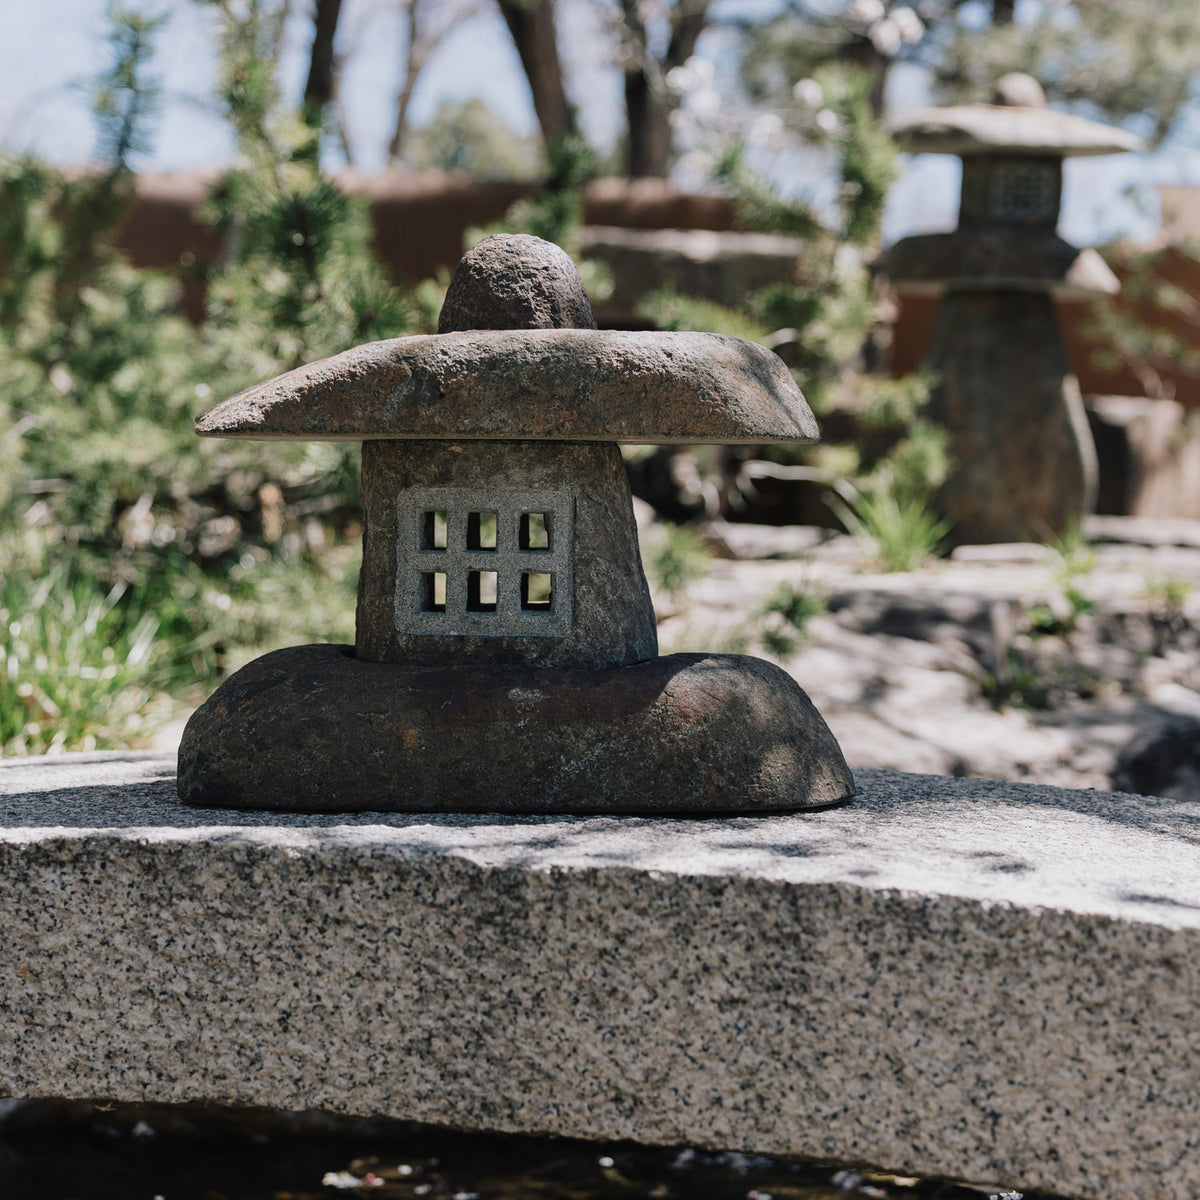 Small Wabi Lantern carved from natural stone with stone window image 3 of 4